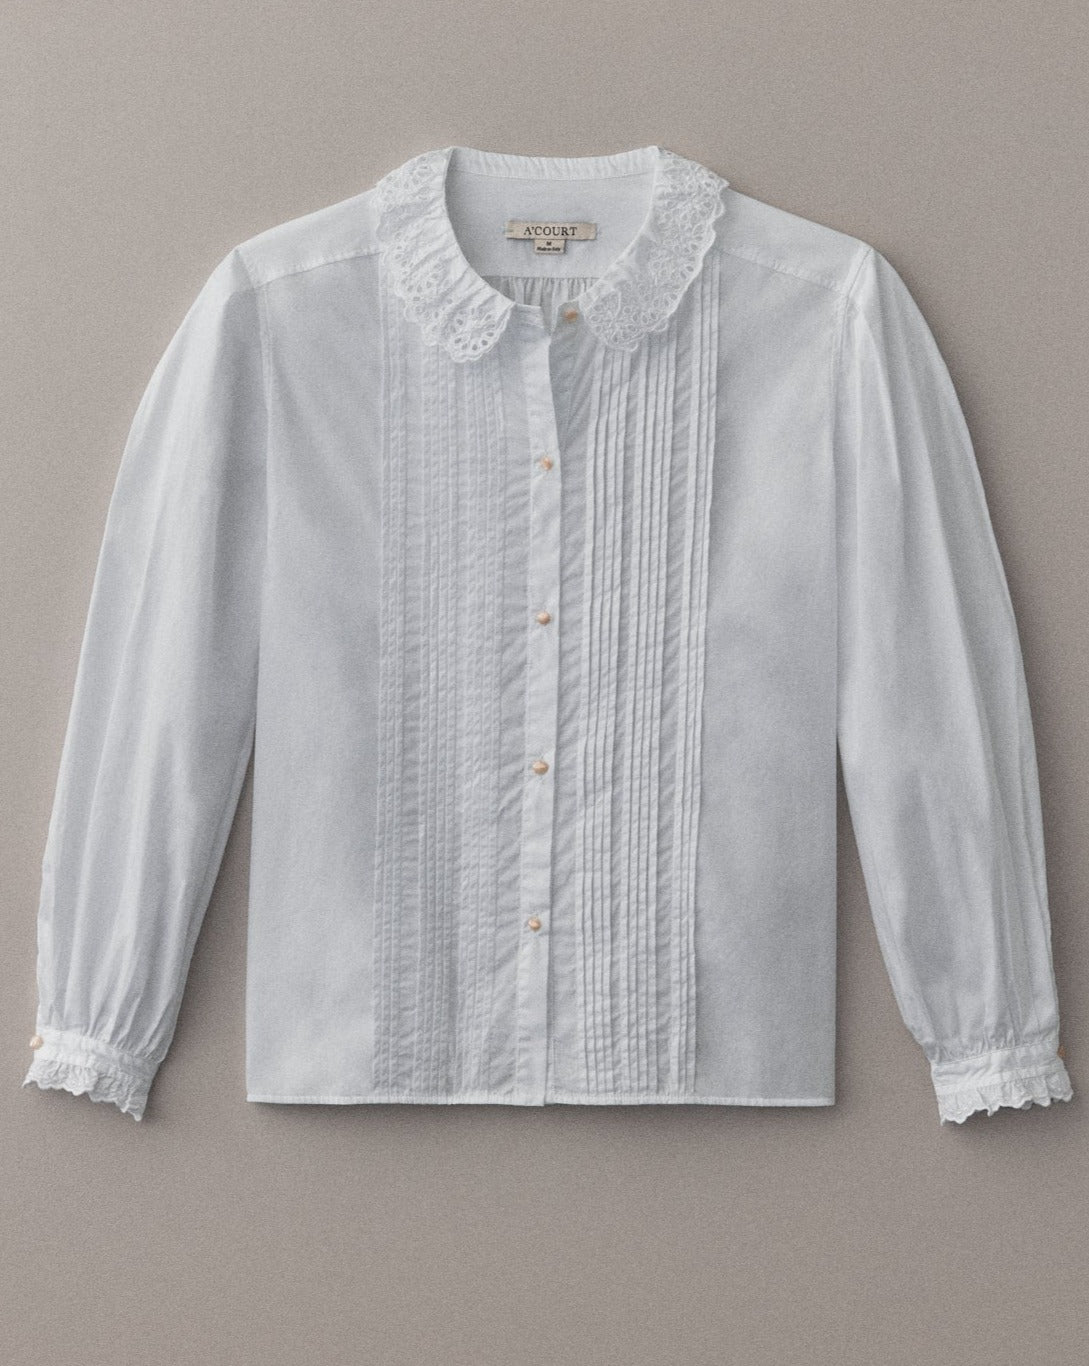 A long sleeve white cotton blouse with eyelet trim lies flat on a light brown field.